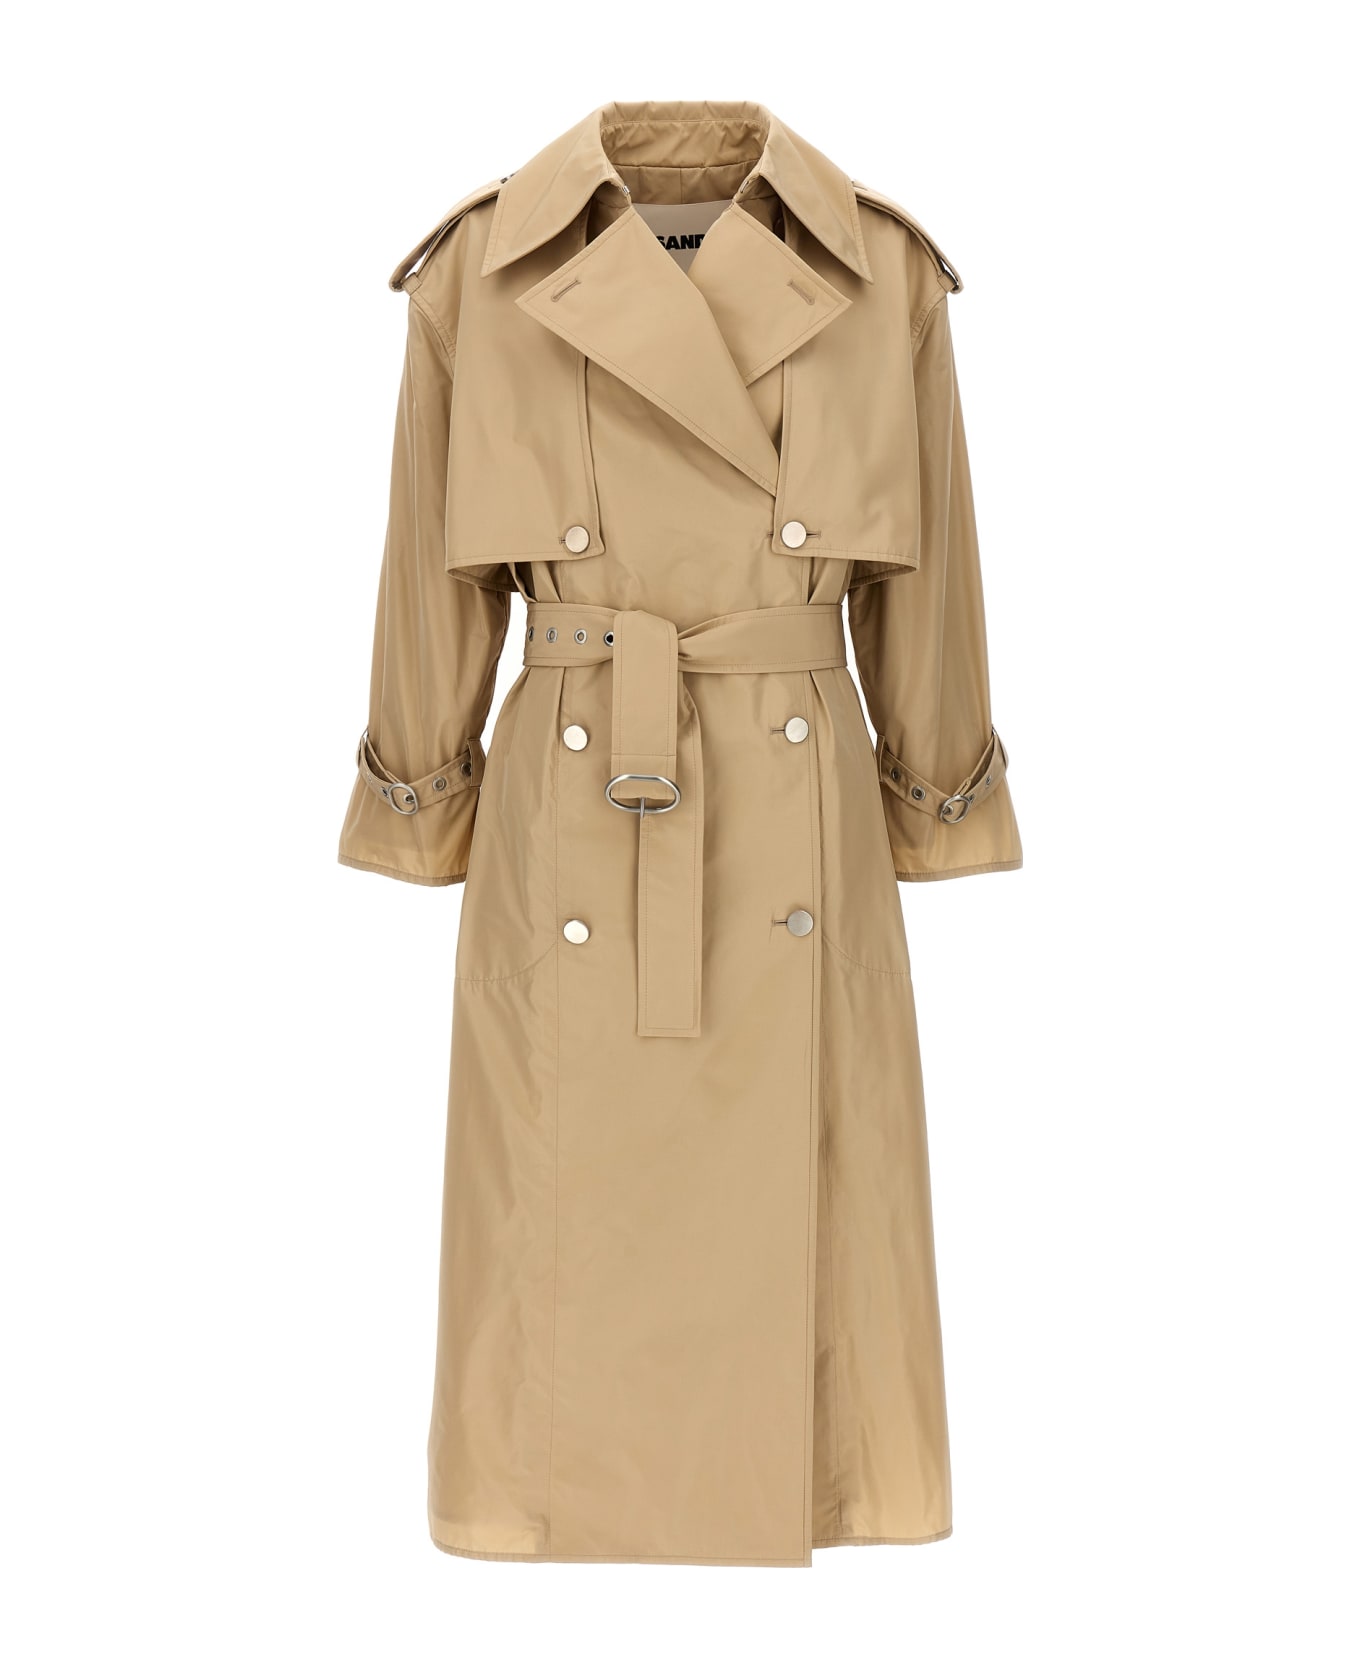 Jil Sander Oversize Double-breasted Trench Coat - Beige コート